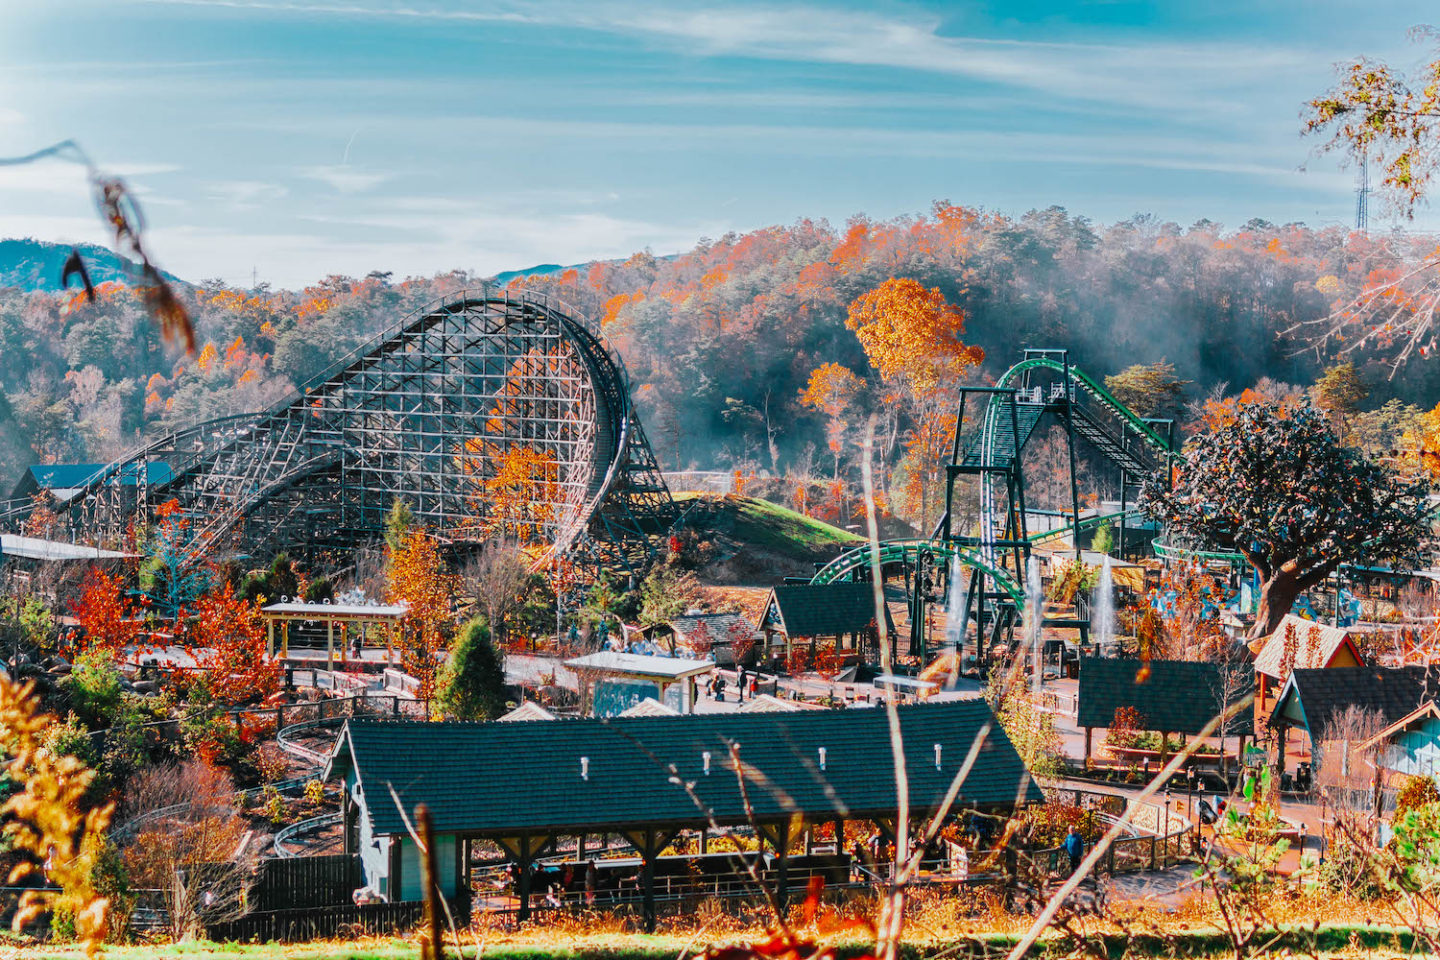 Dollywood Roller coasters